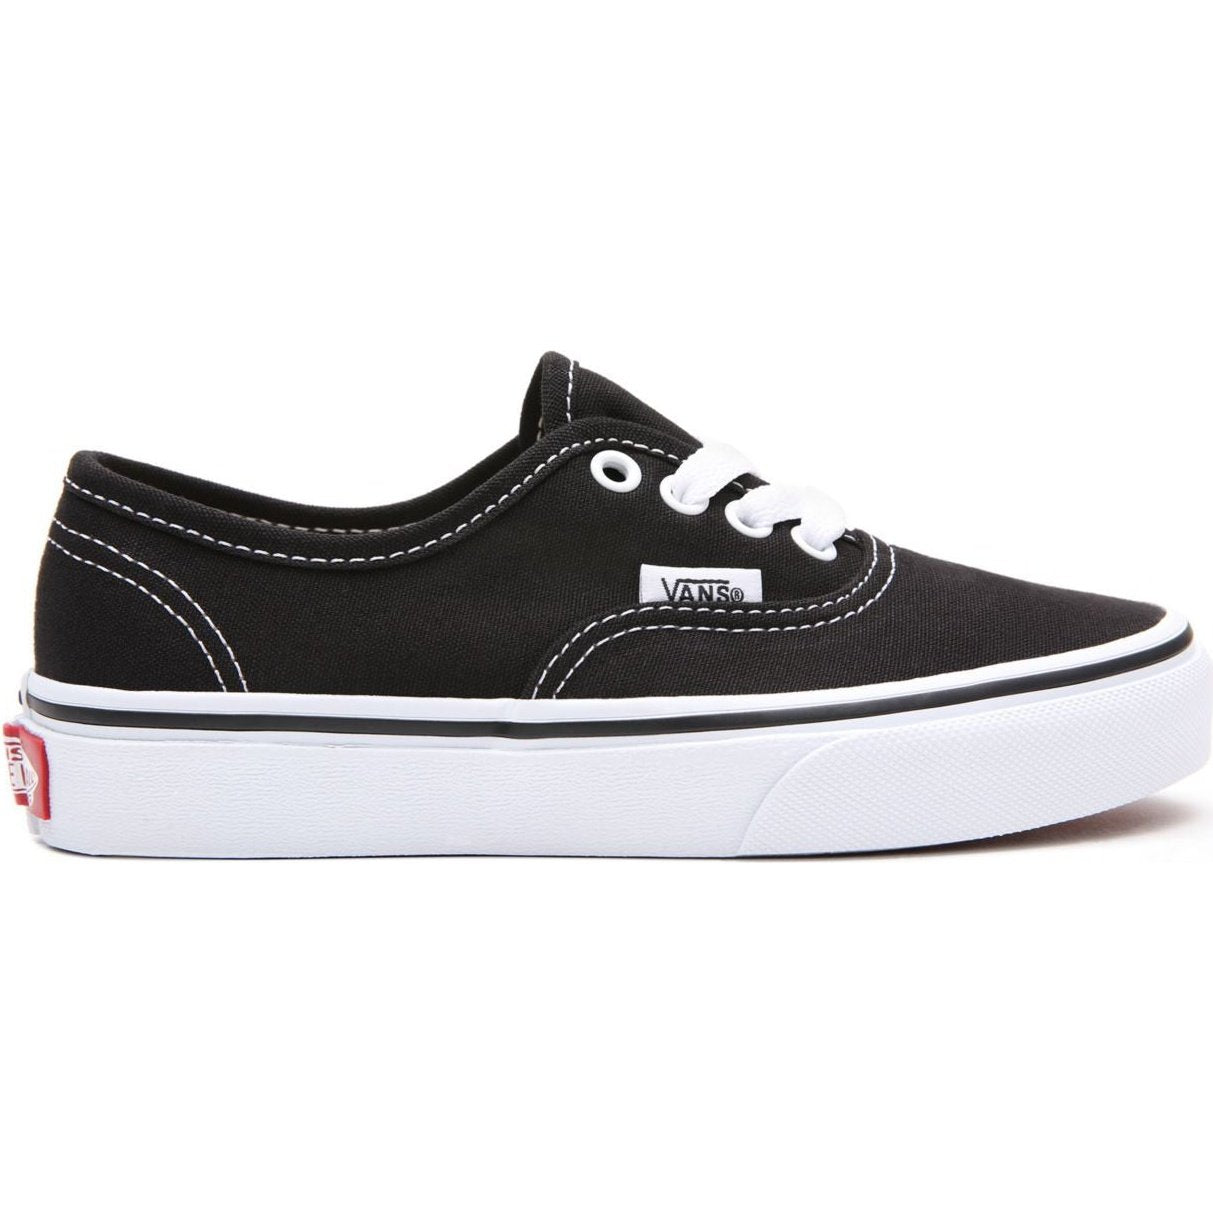 Kids Authentic Shoes (4-8 years) - Sporty Pro